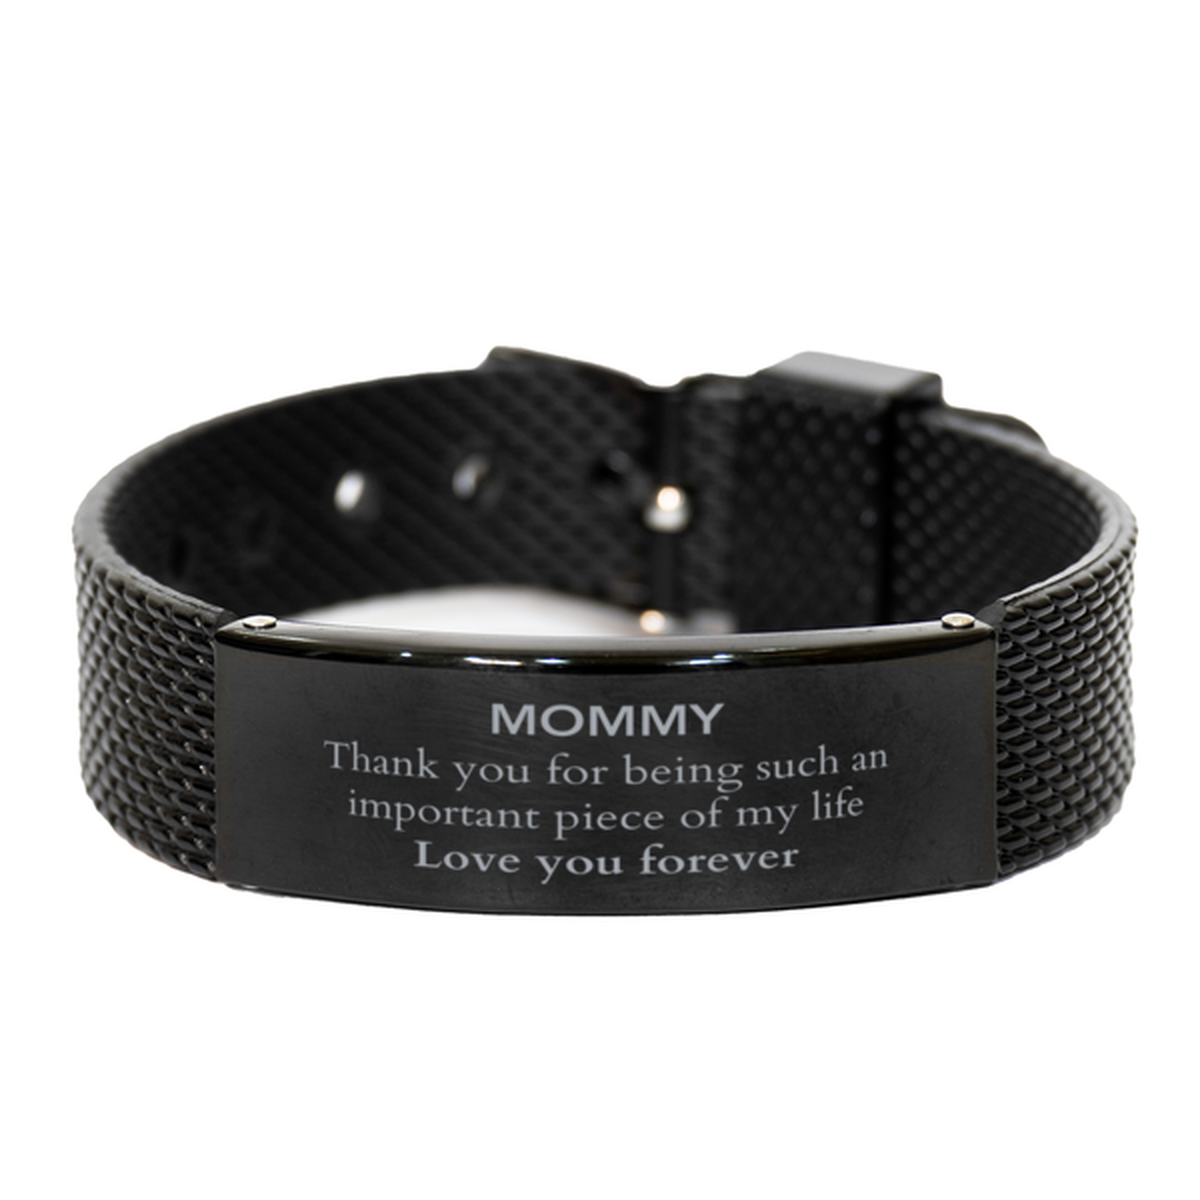 Appropriate Mommy Black Shark Mesh Bracelet Epic Birthday Gifts for Mommy Thank you for being such an important piece of my life Mommy Christmas Mothers Fathers Day